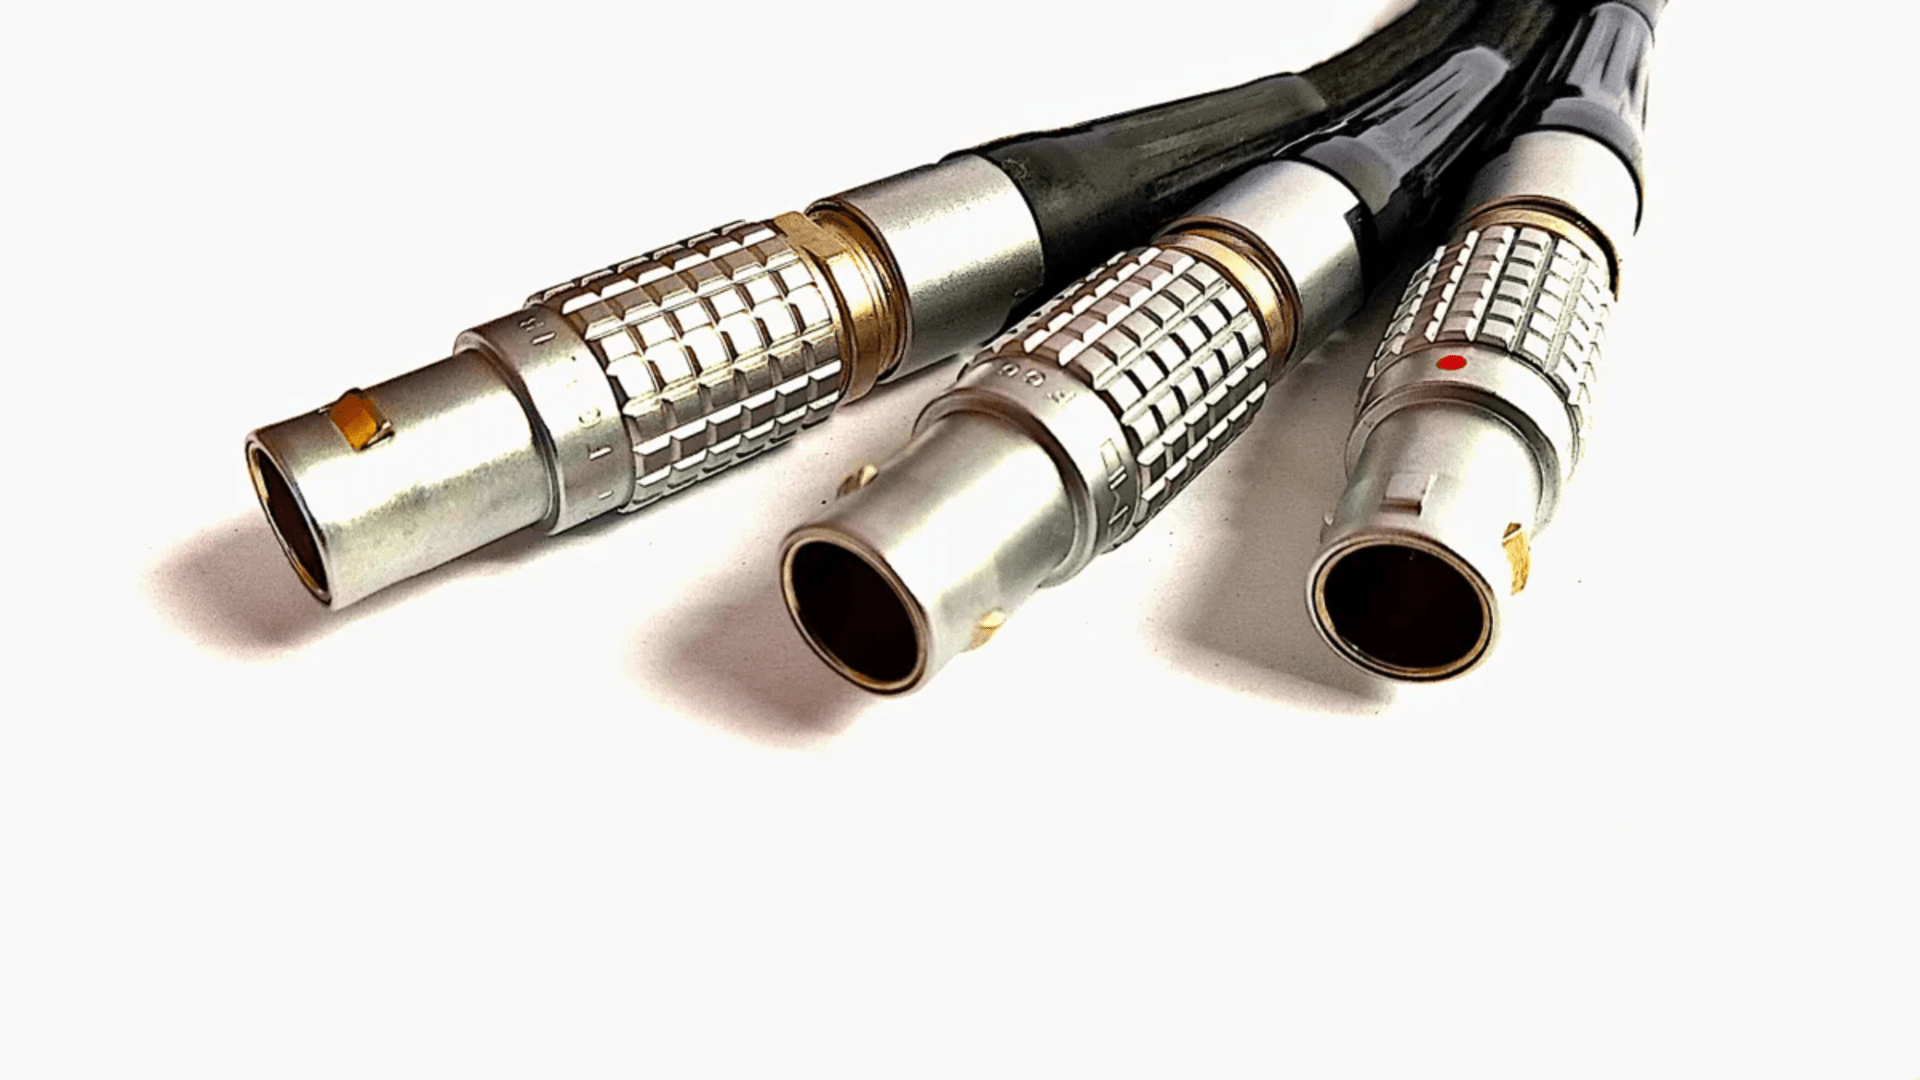 Three coaxial cables with LEMO 5-Pin B Series Circular Push Pull connectors on a white background.